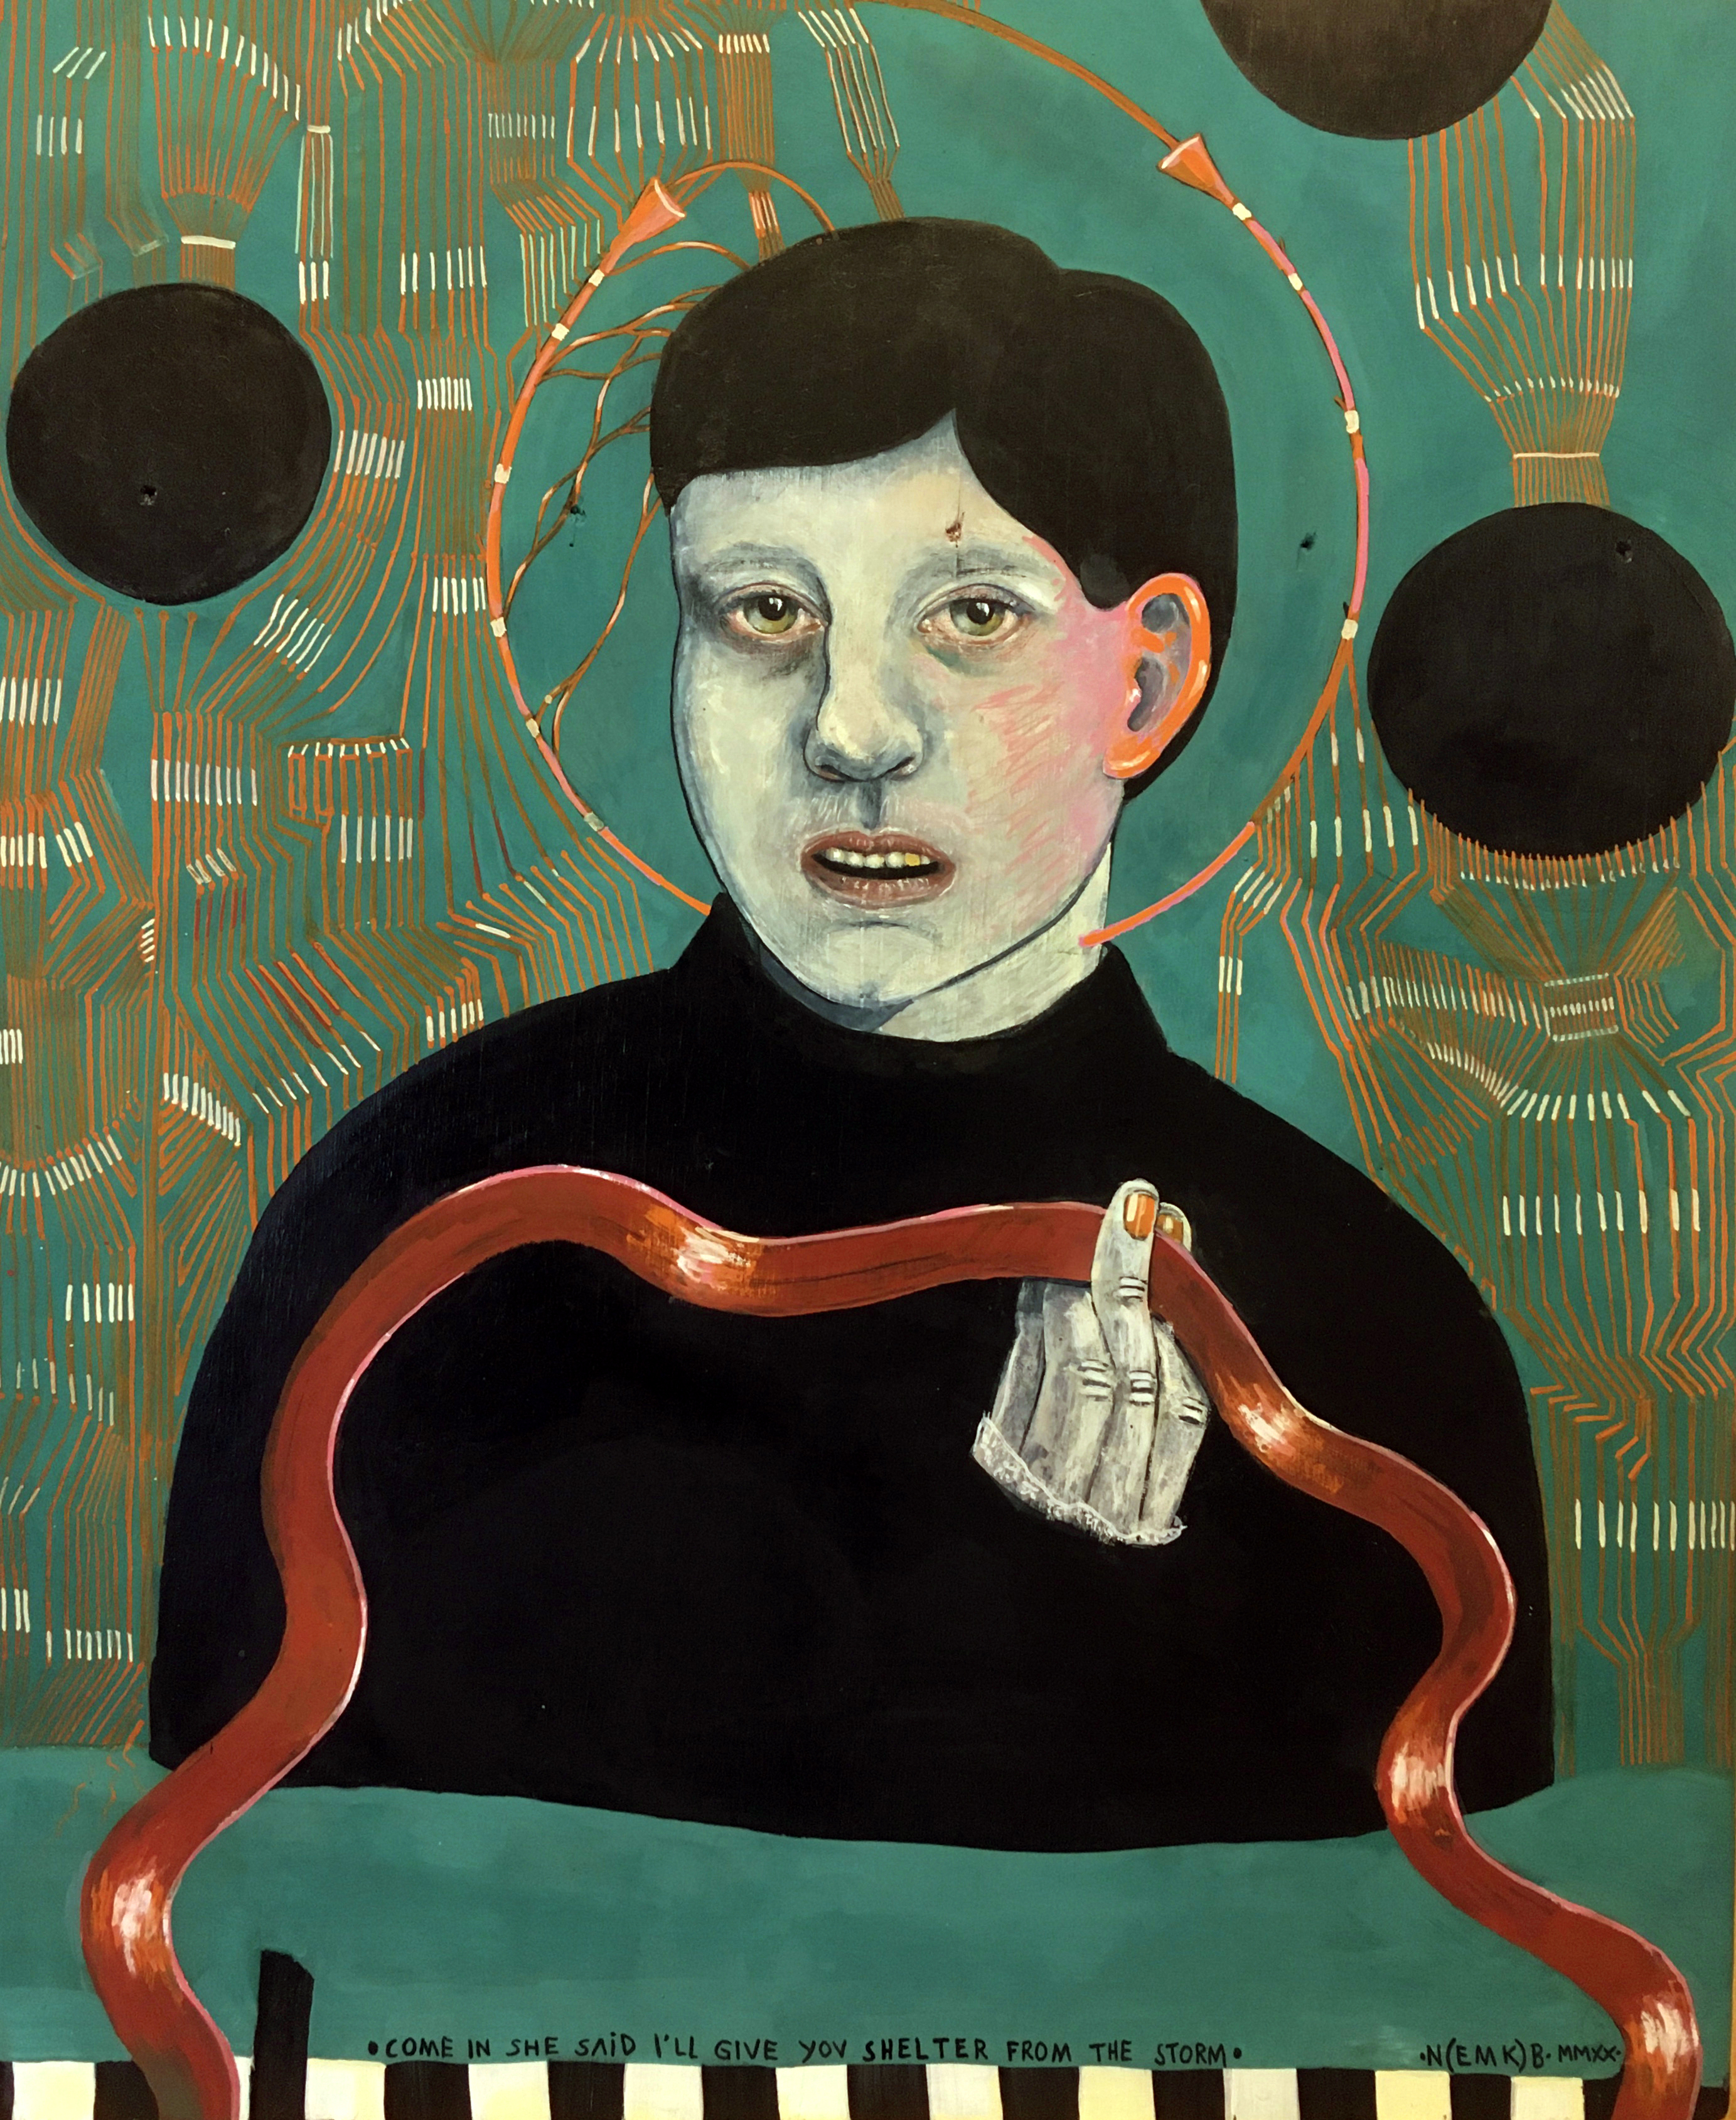 A painting of a person with dark short hair and a dark sweater. The person looks straight ahead and holds something that looks like a red strap. The background is blue-green with orange lines and three larger black filled circles.